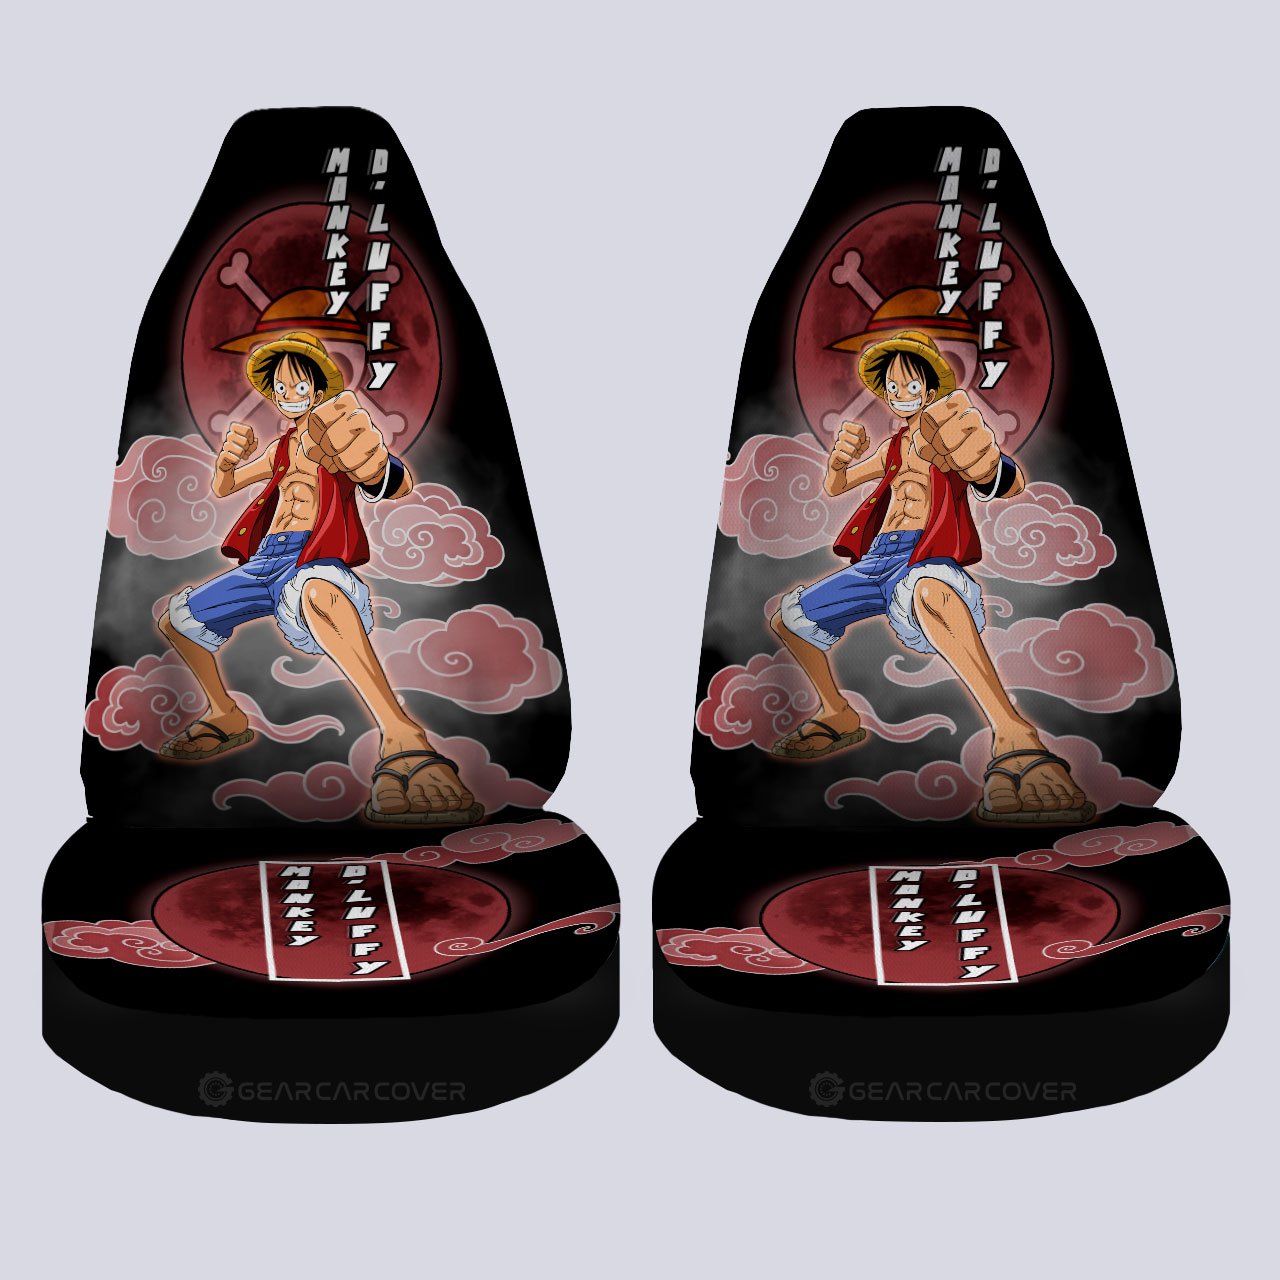 Monkey D. Luffy Car Seat Covers Custom Anime One Piece Car Accessories For Anime Fans - Gearcarcover - 4